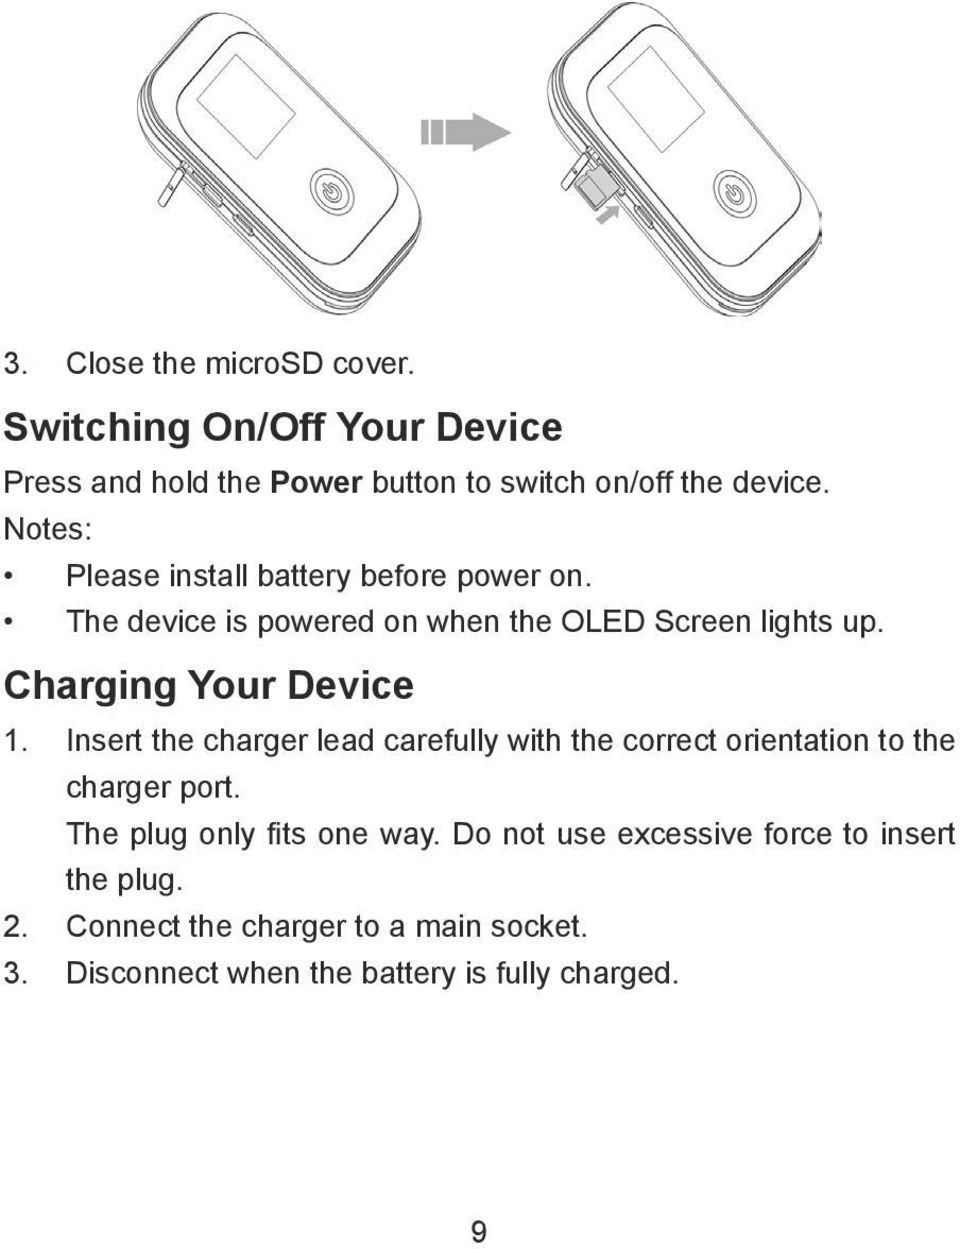 Charging Your Device 1. Insert the charger lead carefully with the correct orientation to the charger port.